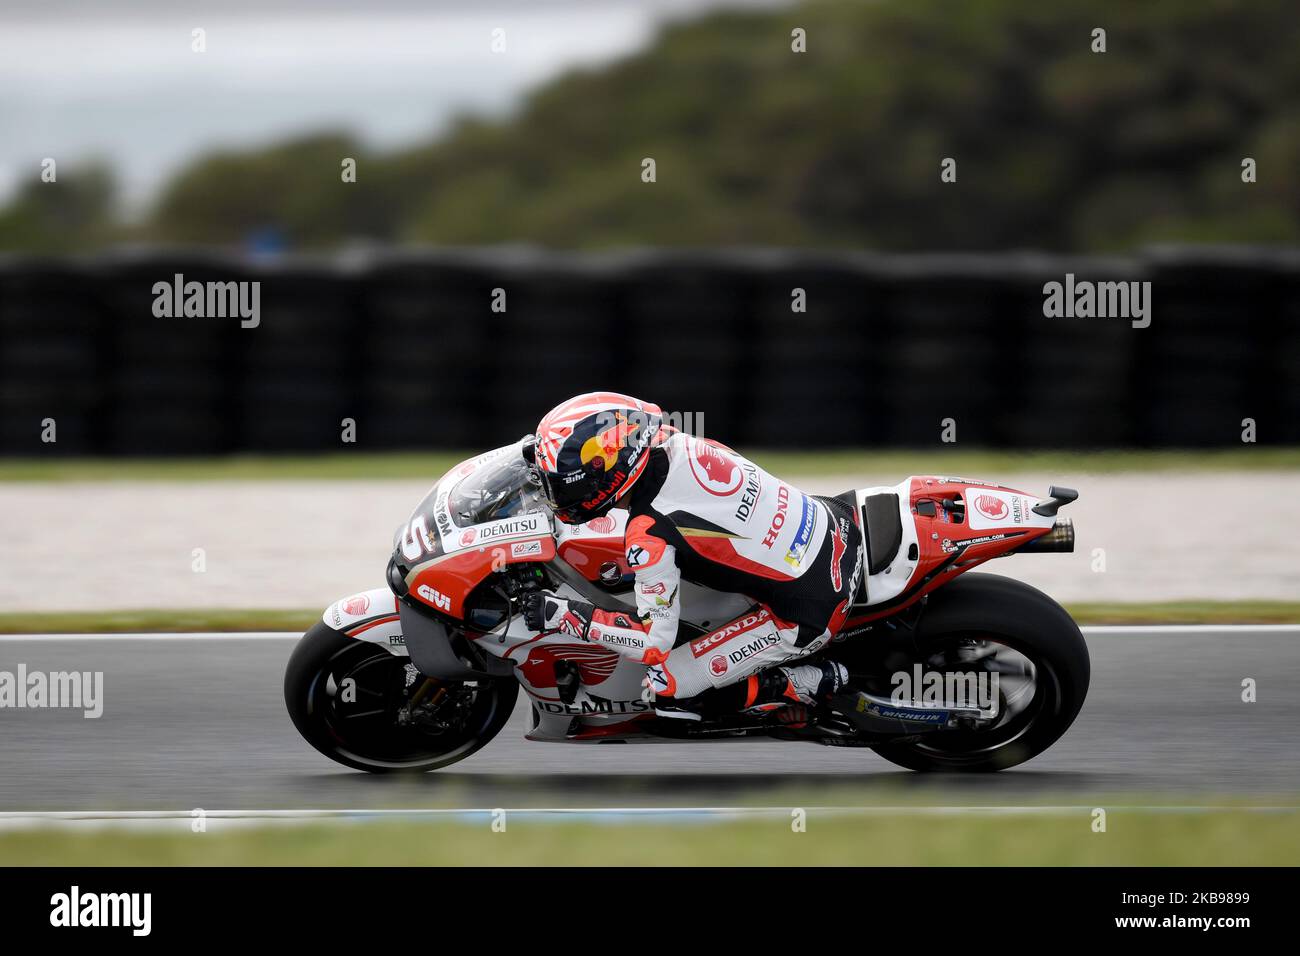 Johann Zarco of France rides the LCR Honda bike during practice ahead of  the Australian MotoGP at the Phillip Island Grand Prix Circuit on October  26, 2019 in Phillip Island, Australia (Photo